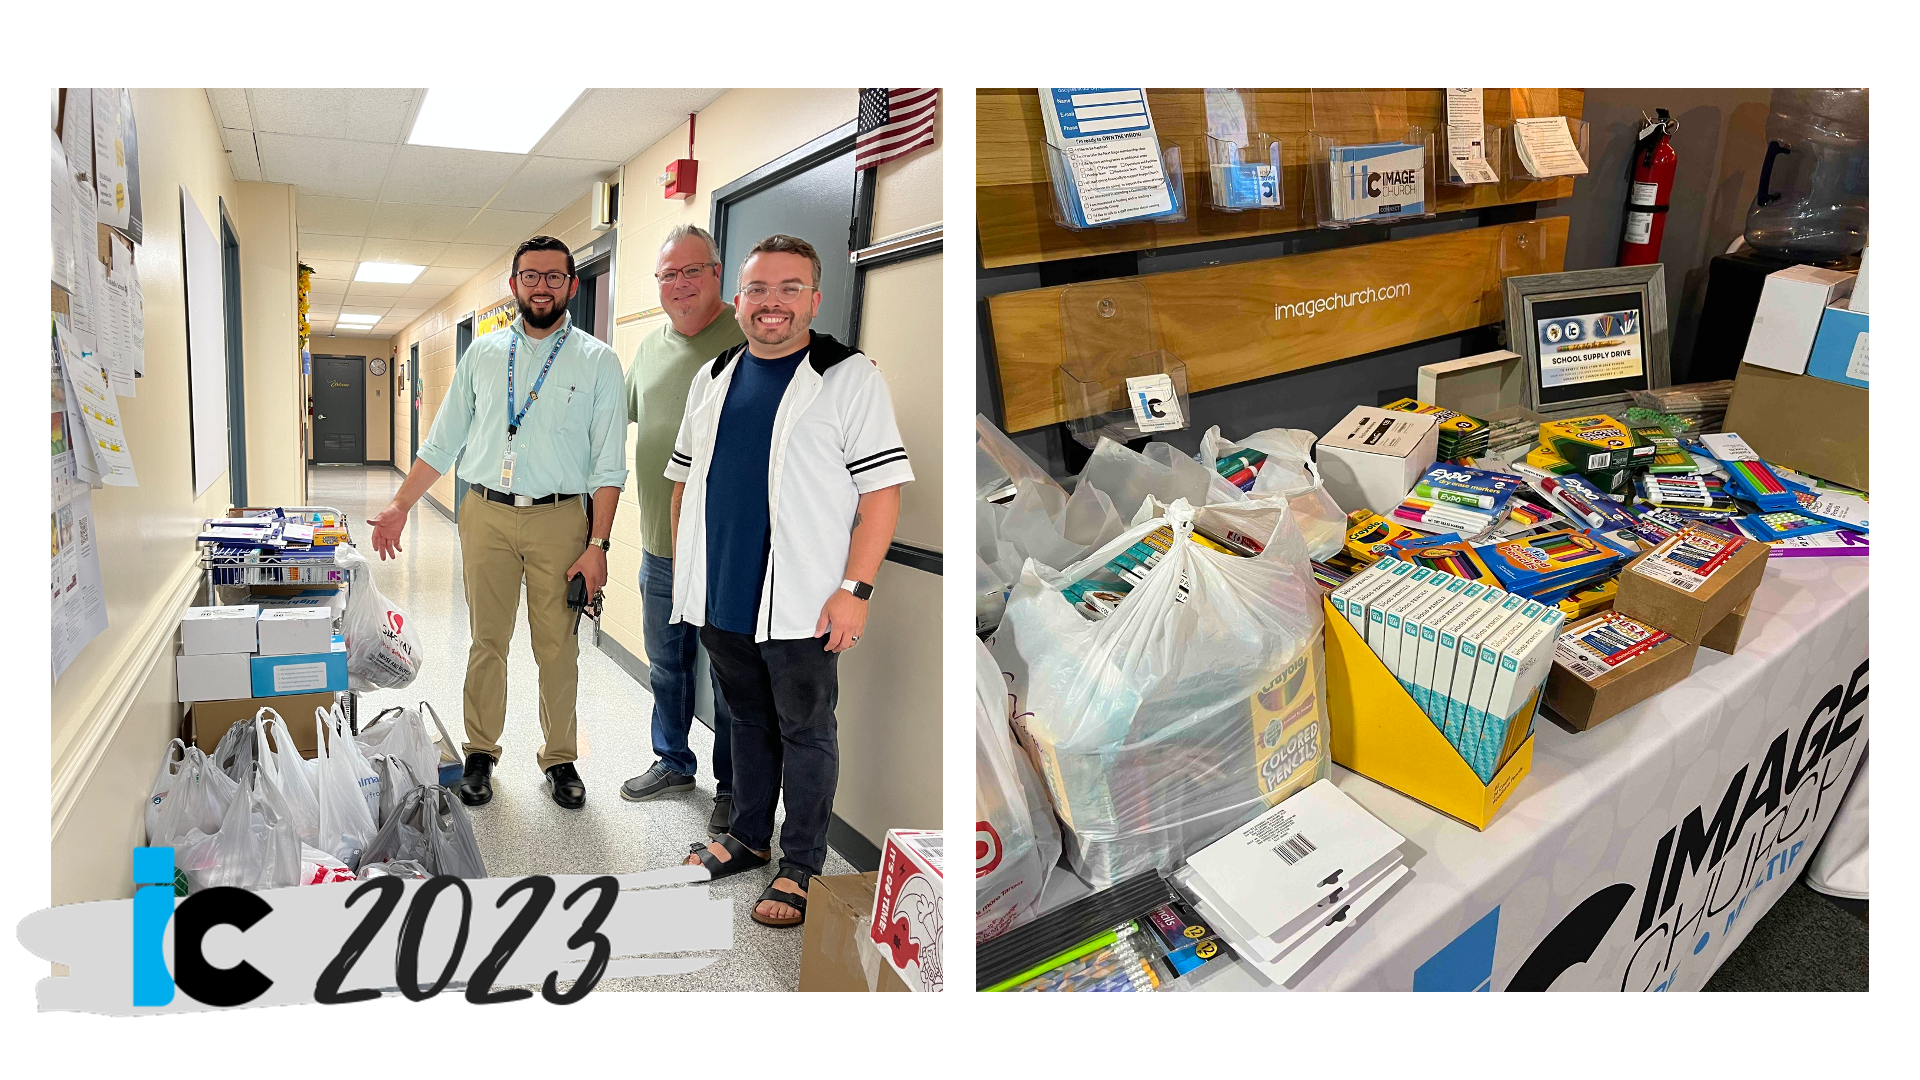    We showed the love of Jesus locally by helping the Hornets at Fred Lynn Middle School throughout the year with needed school supplies and personal hygiene items.&nbsp;   